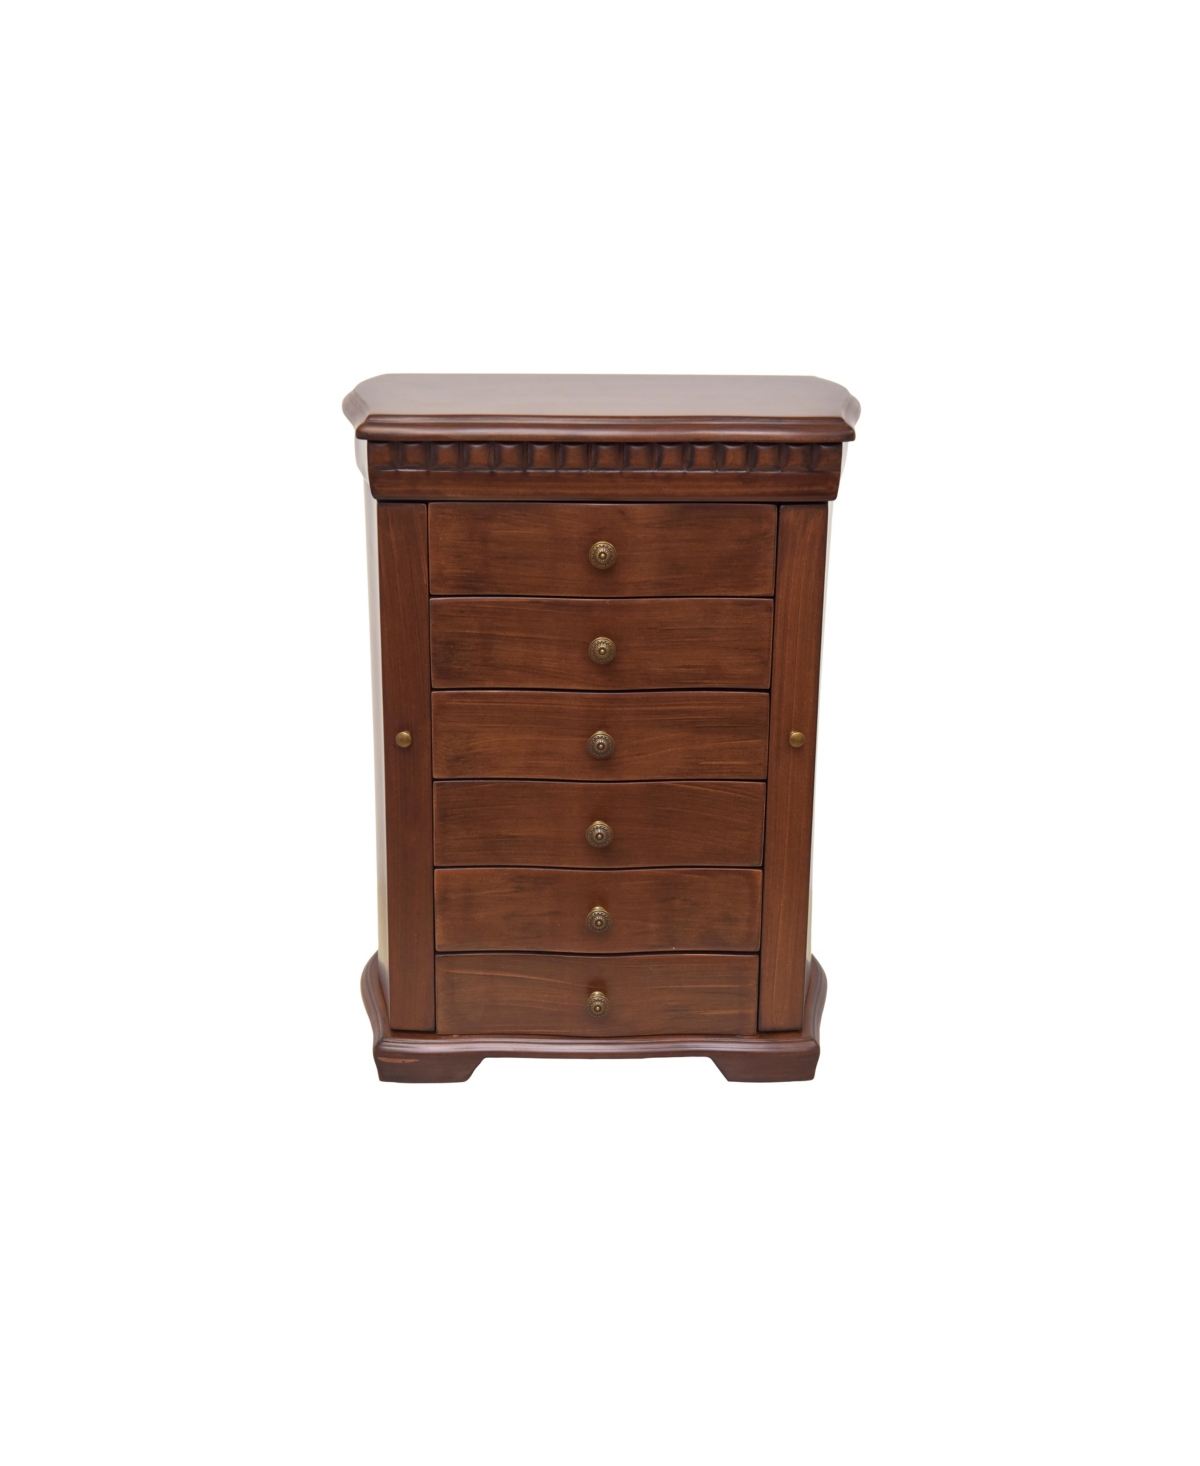 Traditional Large Jewelry Box - Brown